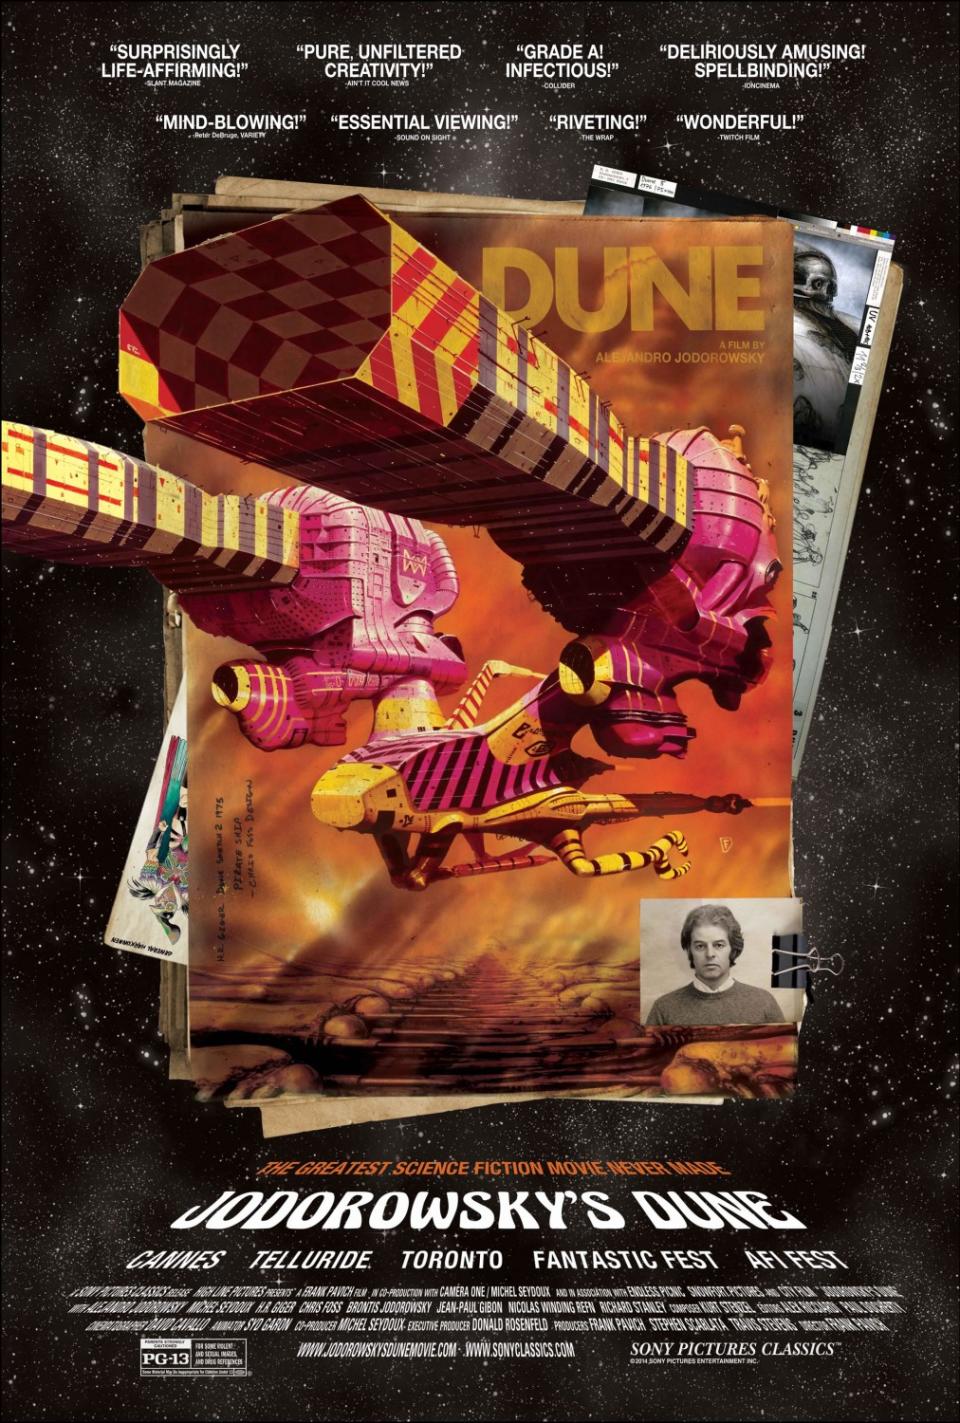 Released in 2013, this documentary gave a tantalising glimpse at what Jodorowsky's Dune could have been (Sony Pictures Classics)